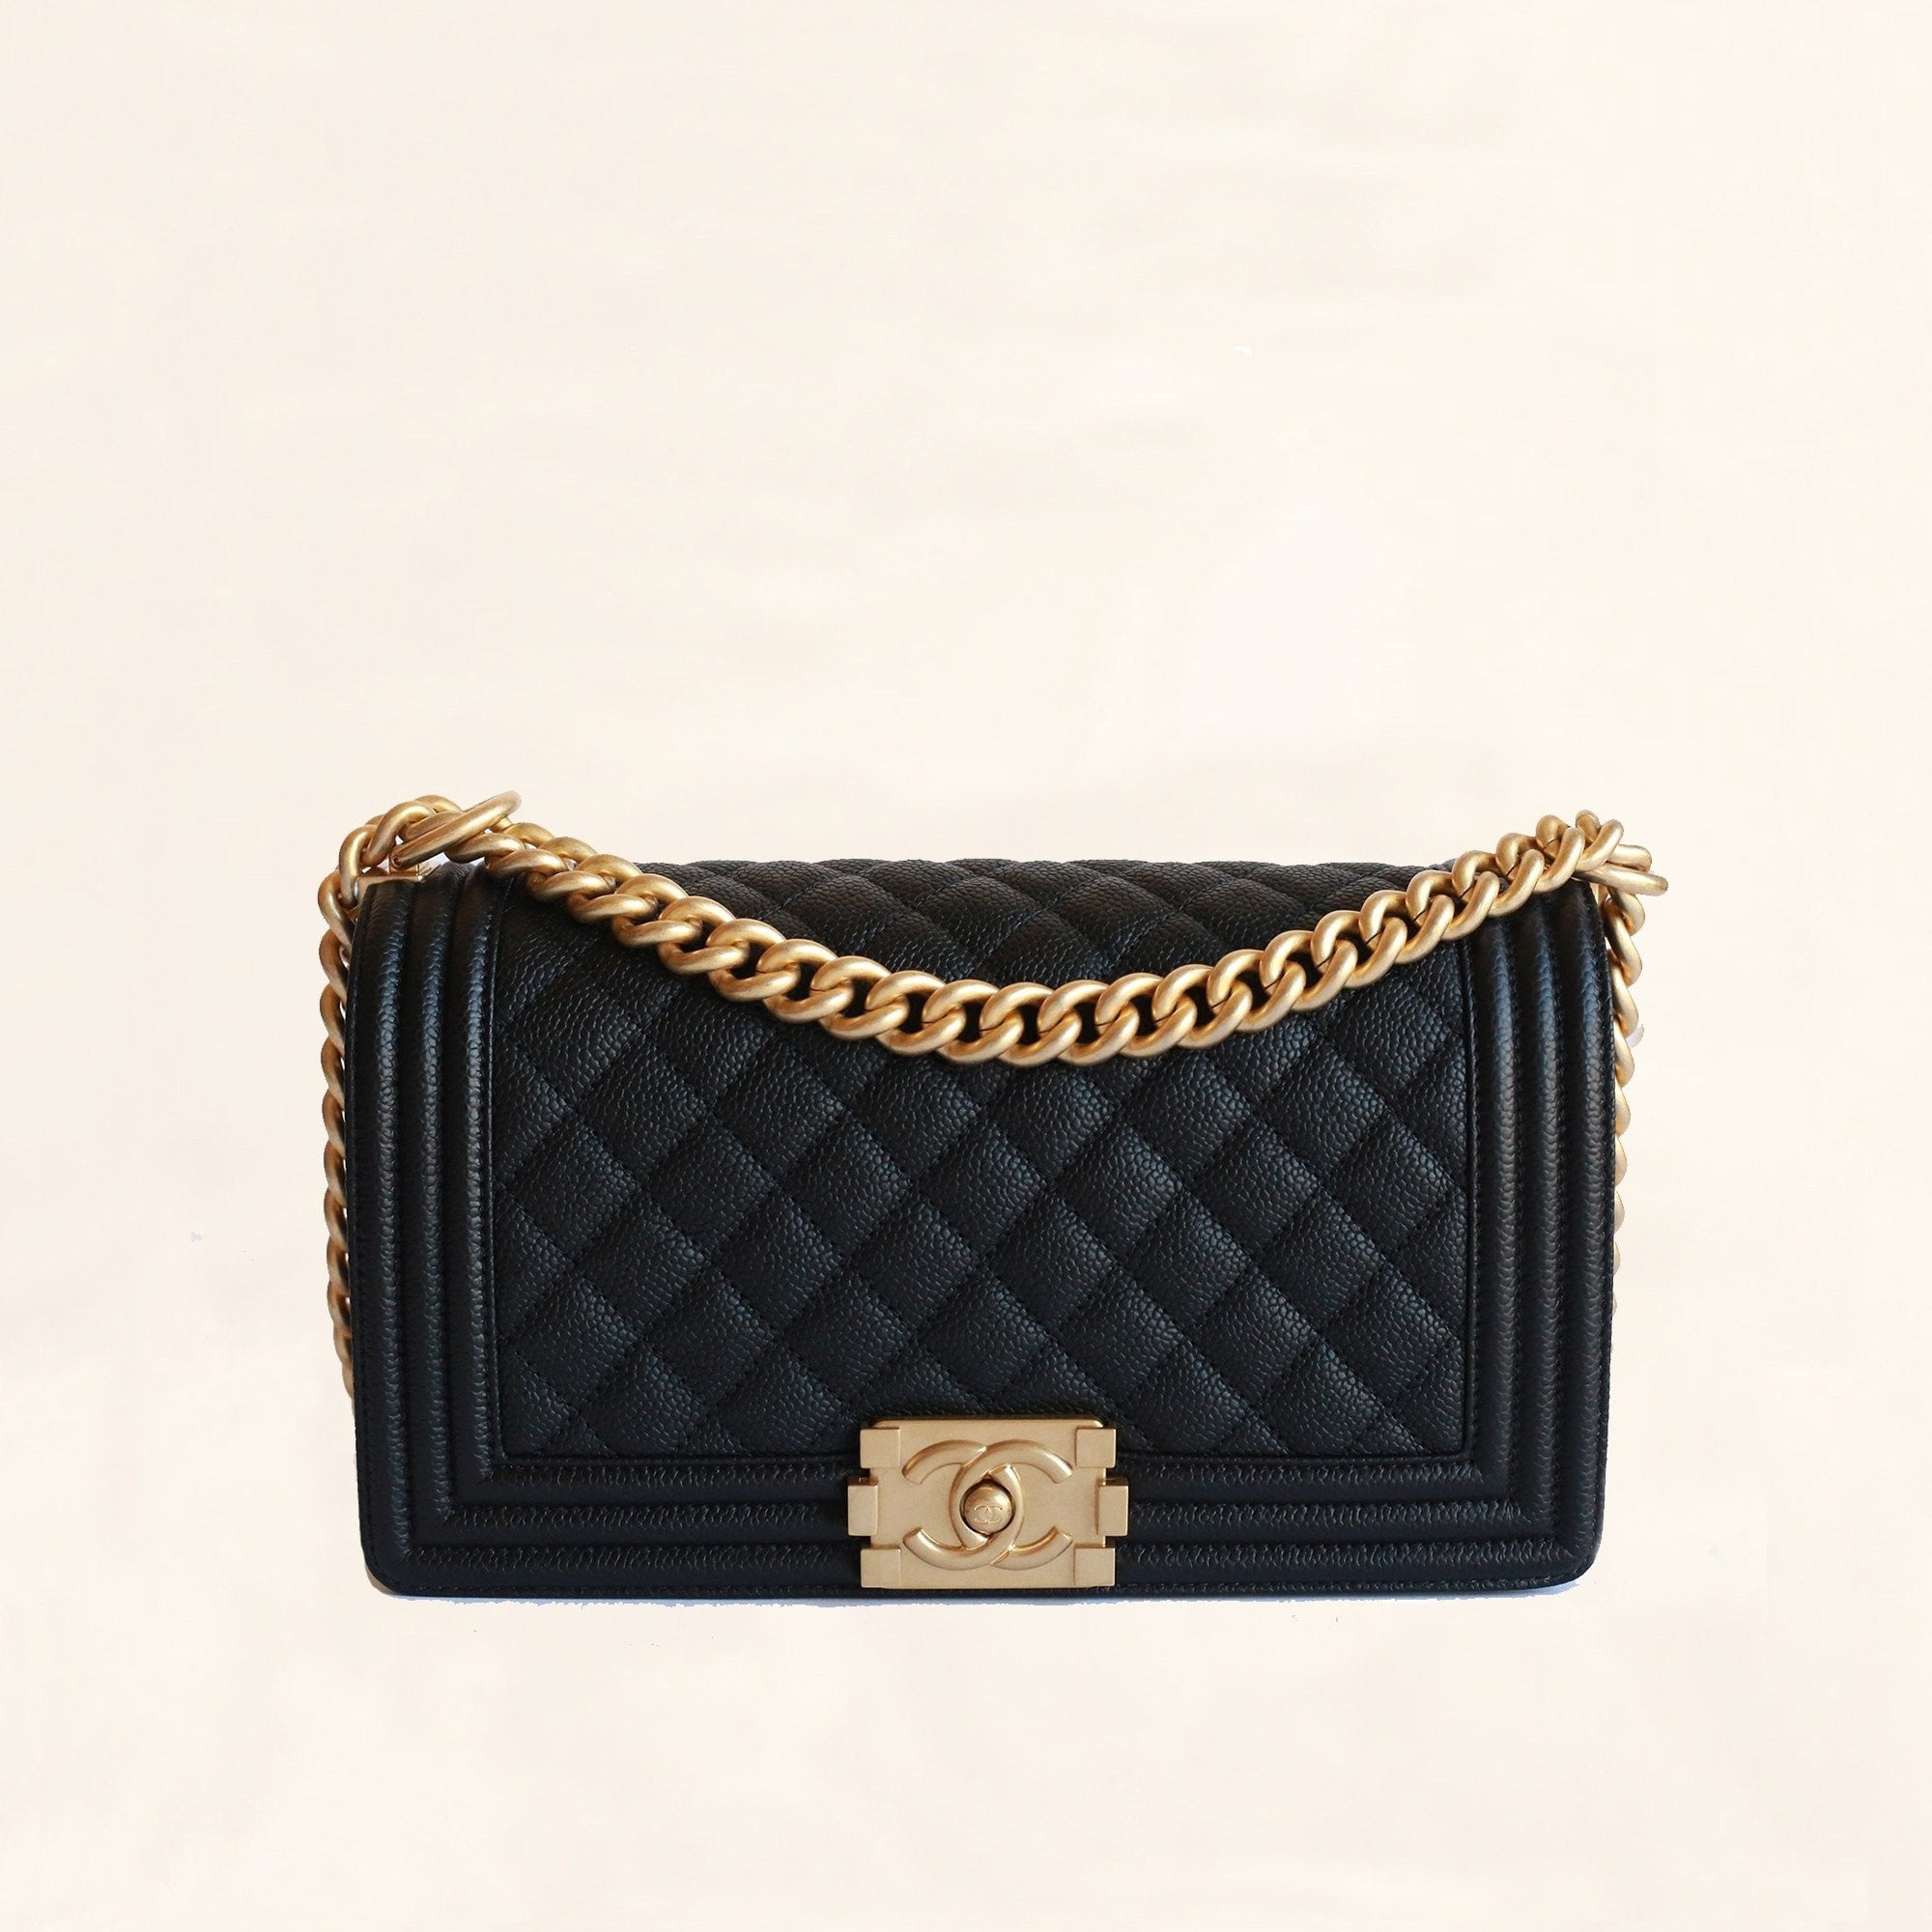 Trendy cc crossbody bag Chanel Pink in Not specified - 25511025